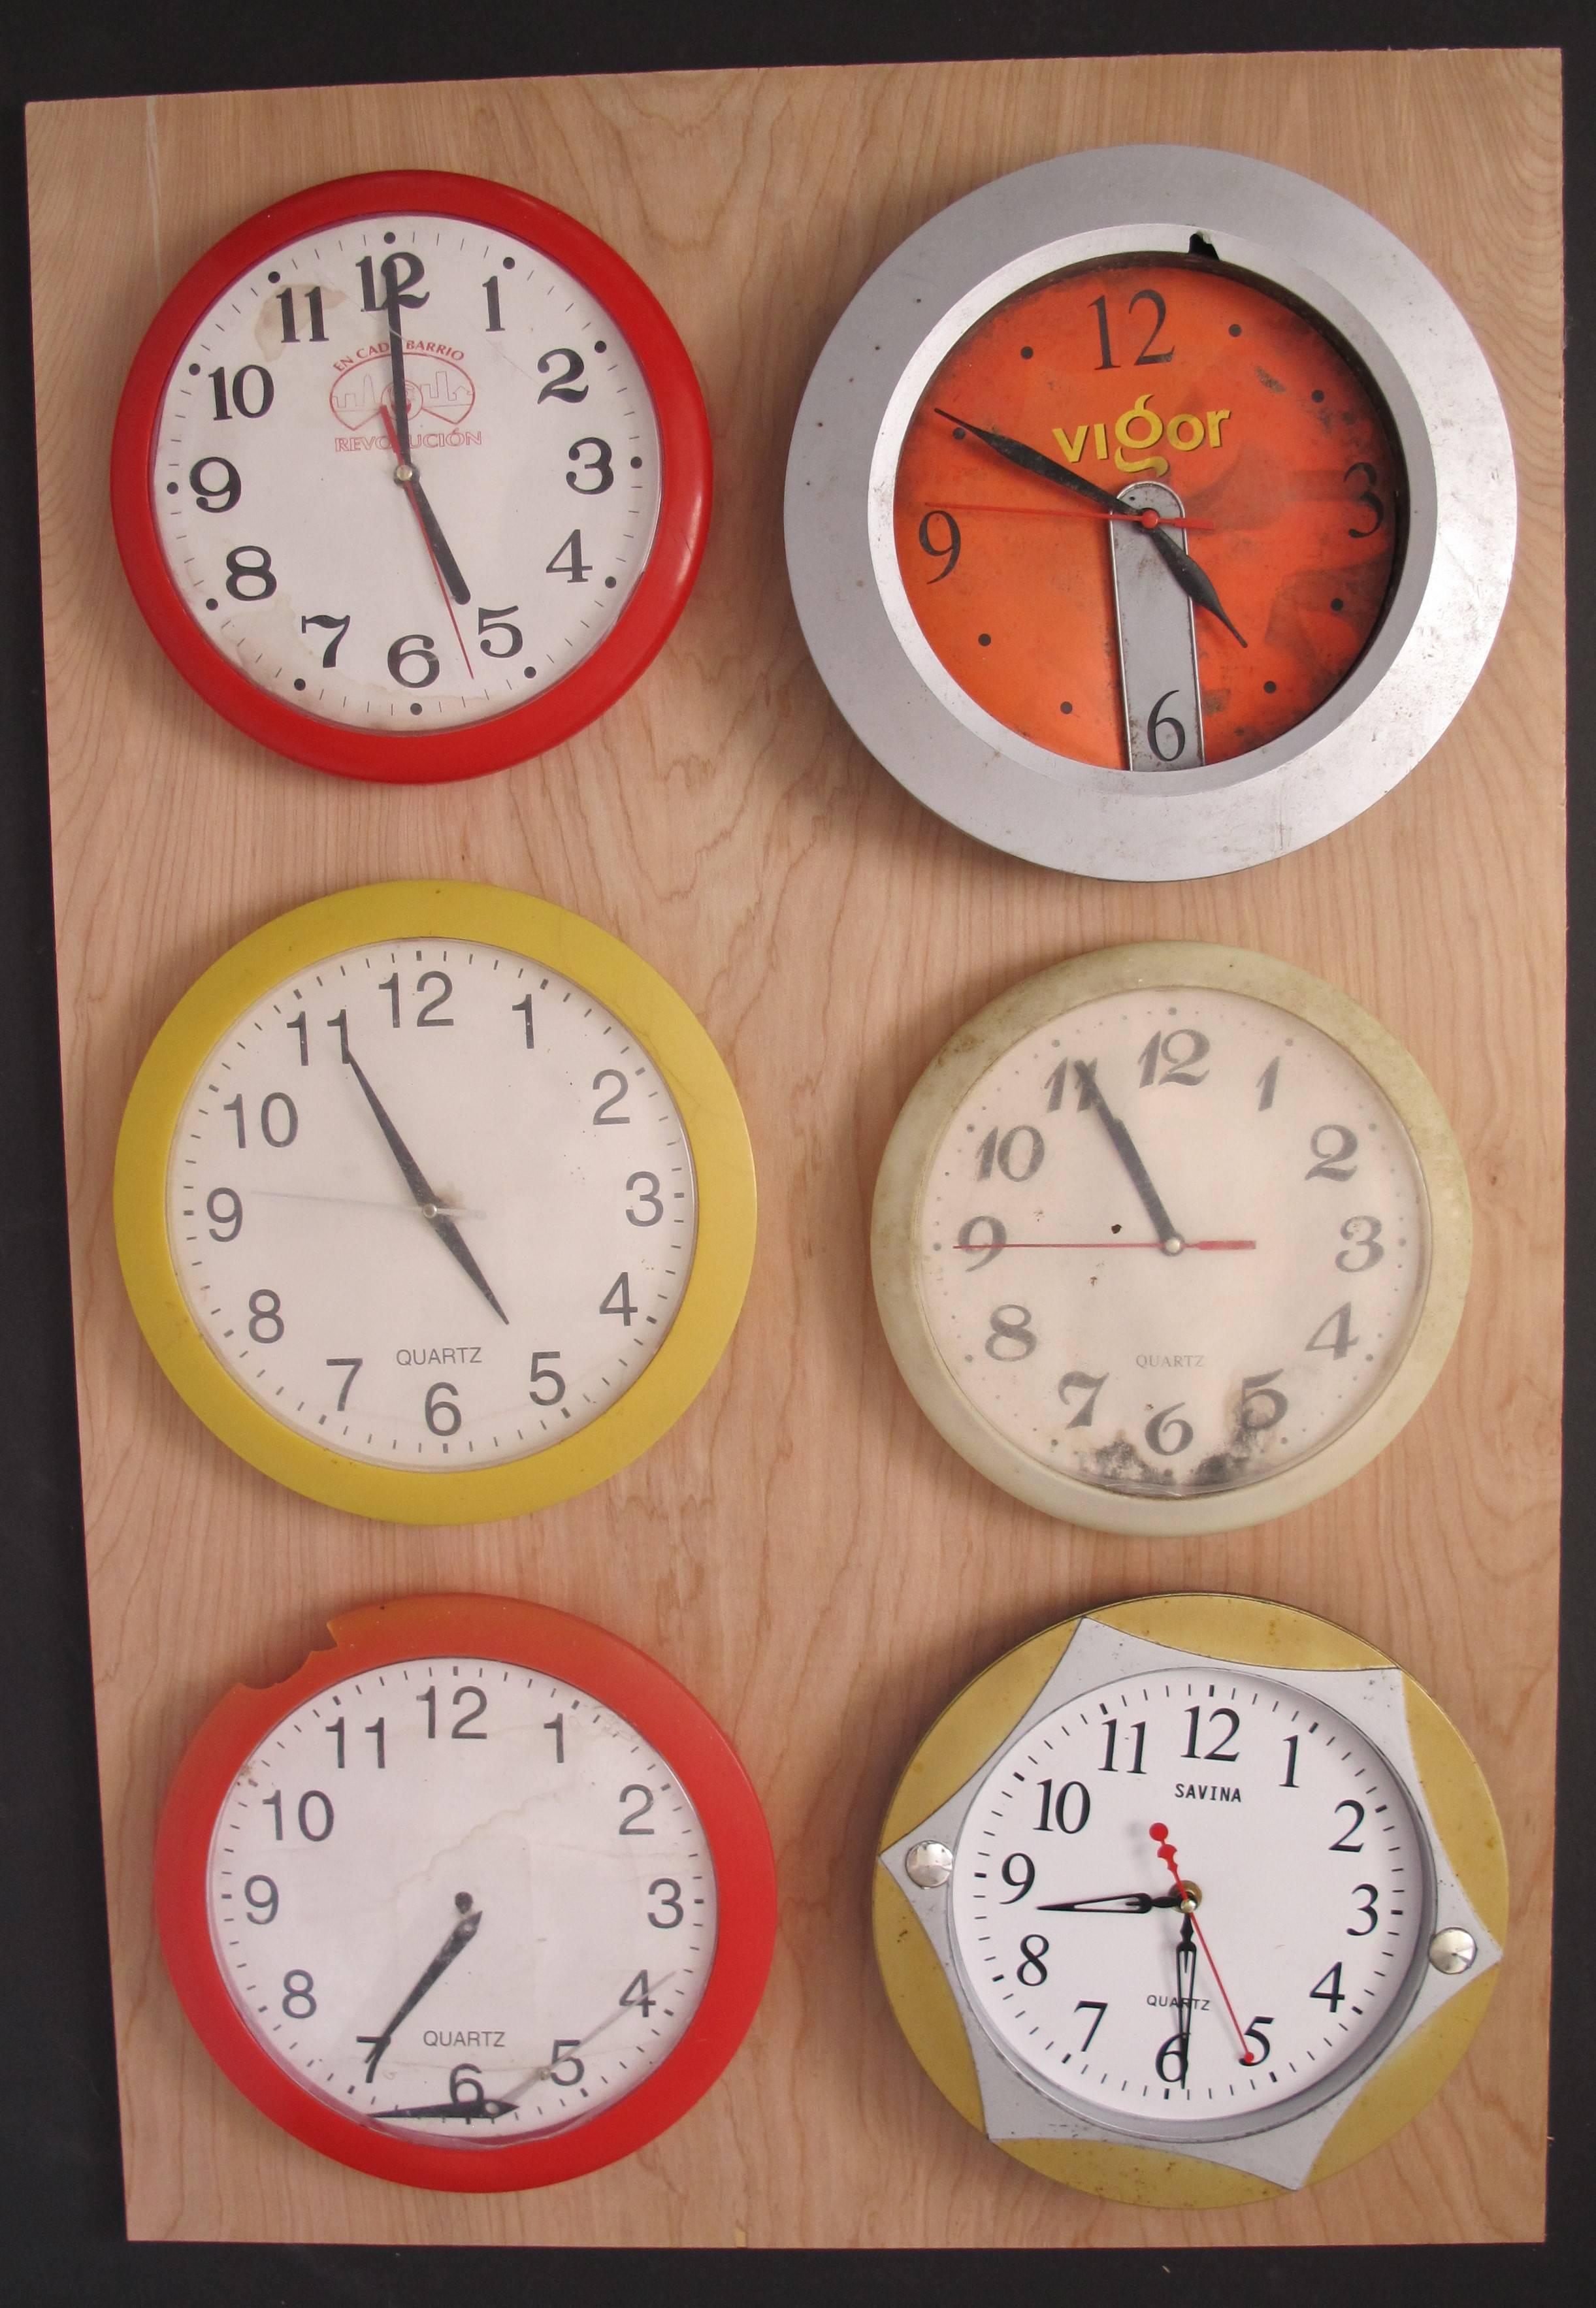 Six non functional clocks on panel by Canadian artist Kalev Jaason. In traveling in Cuba over a period of many trip Kalev noticed that in many houses there were wall clocks where time was frozen. He noted that maybe 90% of the clocks hands did not